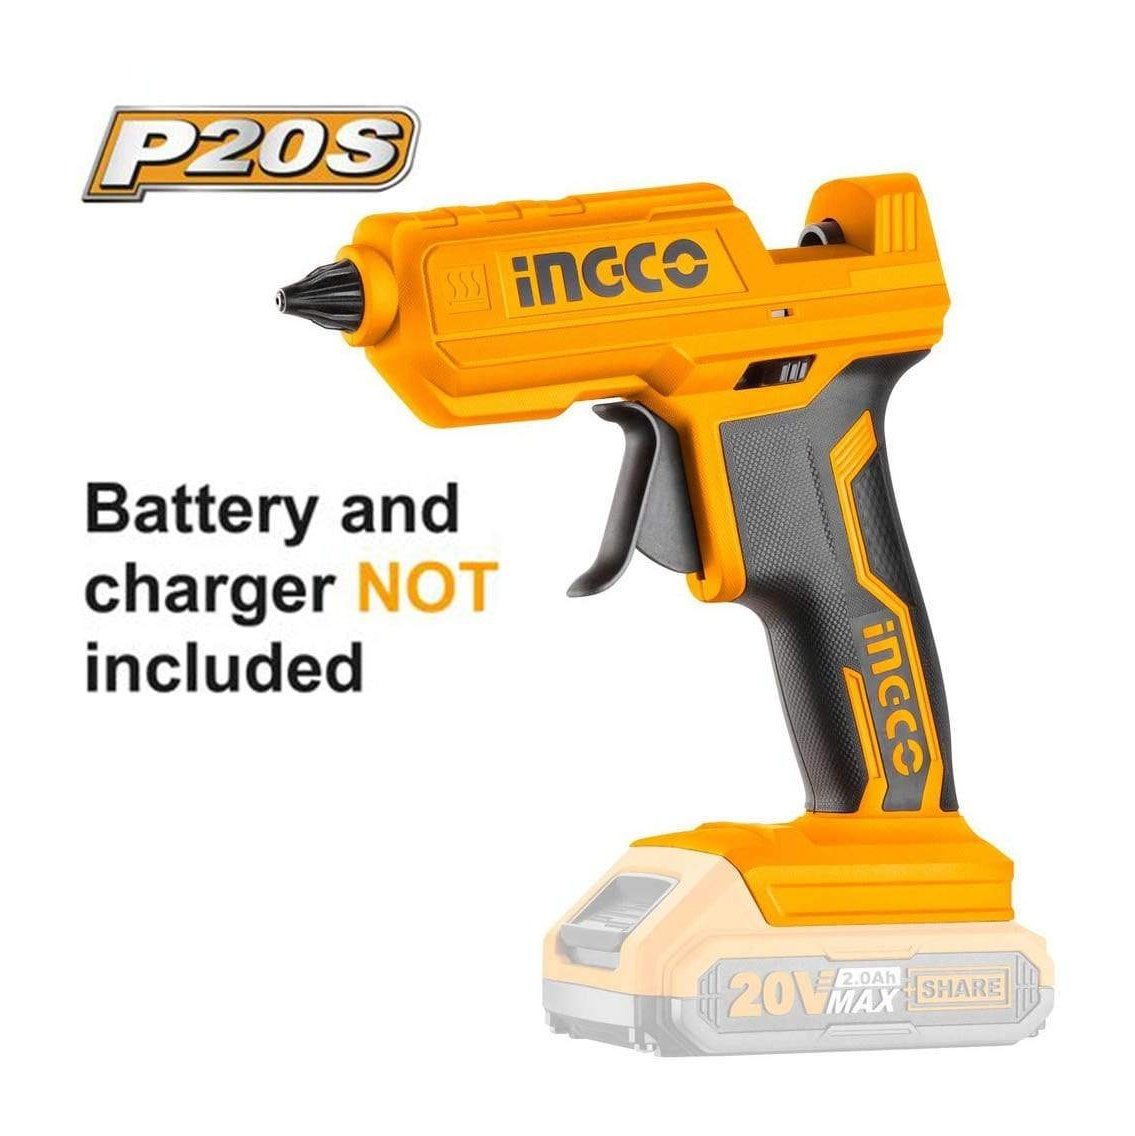 Ingco Lithium-Ion Glue Gun 20V - CGGLI2001 | Supply Master | Accra, Ghana Tools Without Battery & Charger Building Steel Engineering Hardware tool